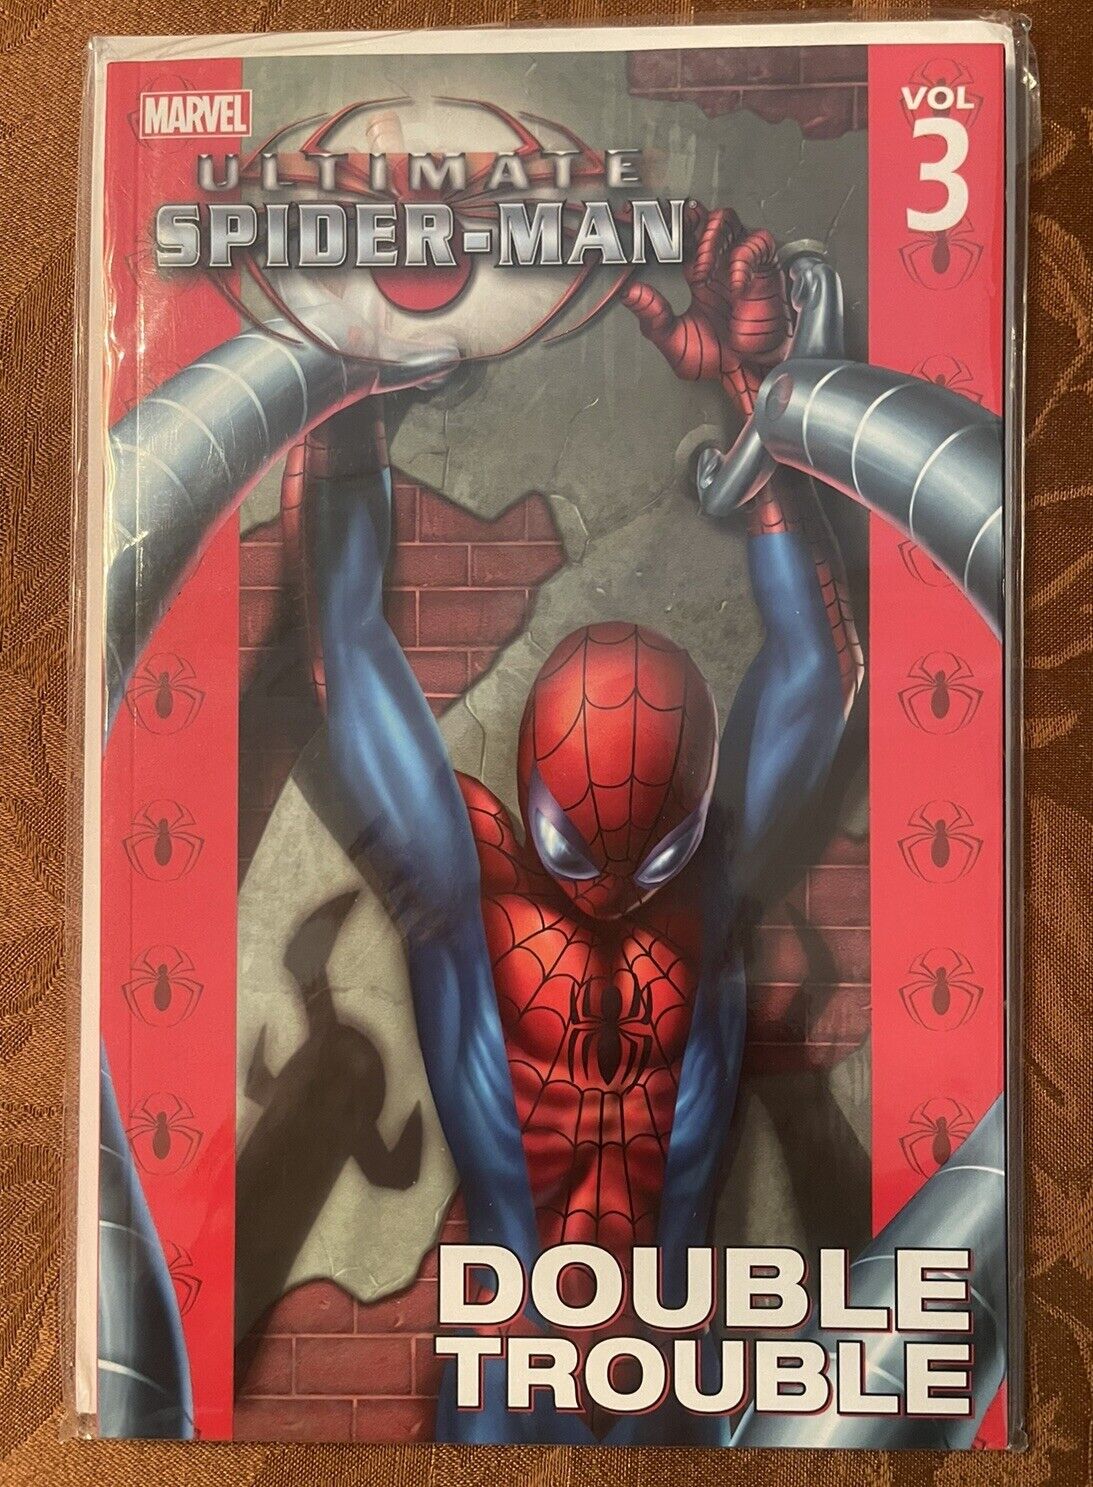 ULTIMATE SPIDER-MAN : DOUBLE TROUBLE V3 TPB BENDIS UNREAD/Unopened. Minty WOW